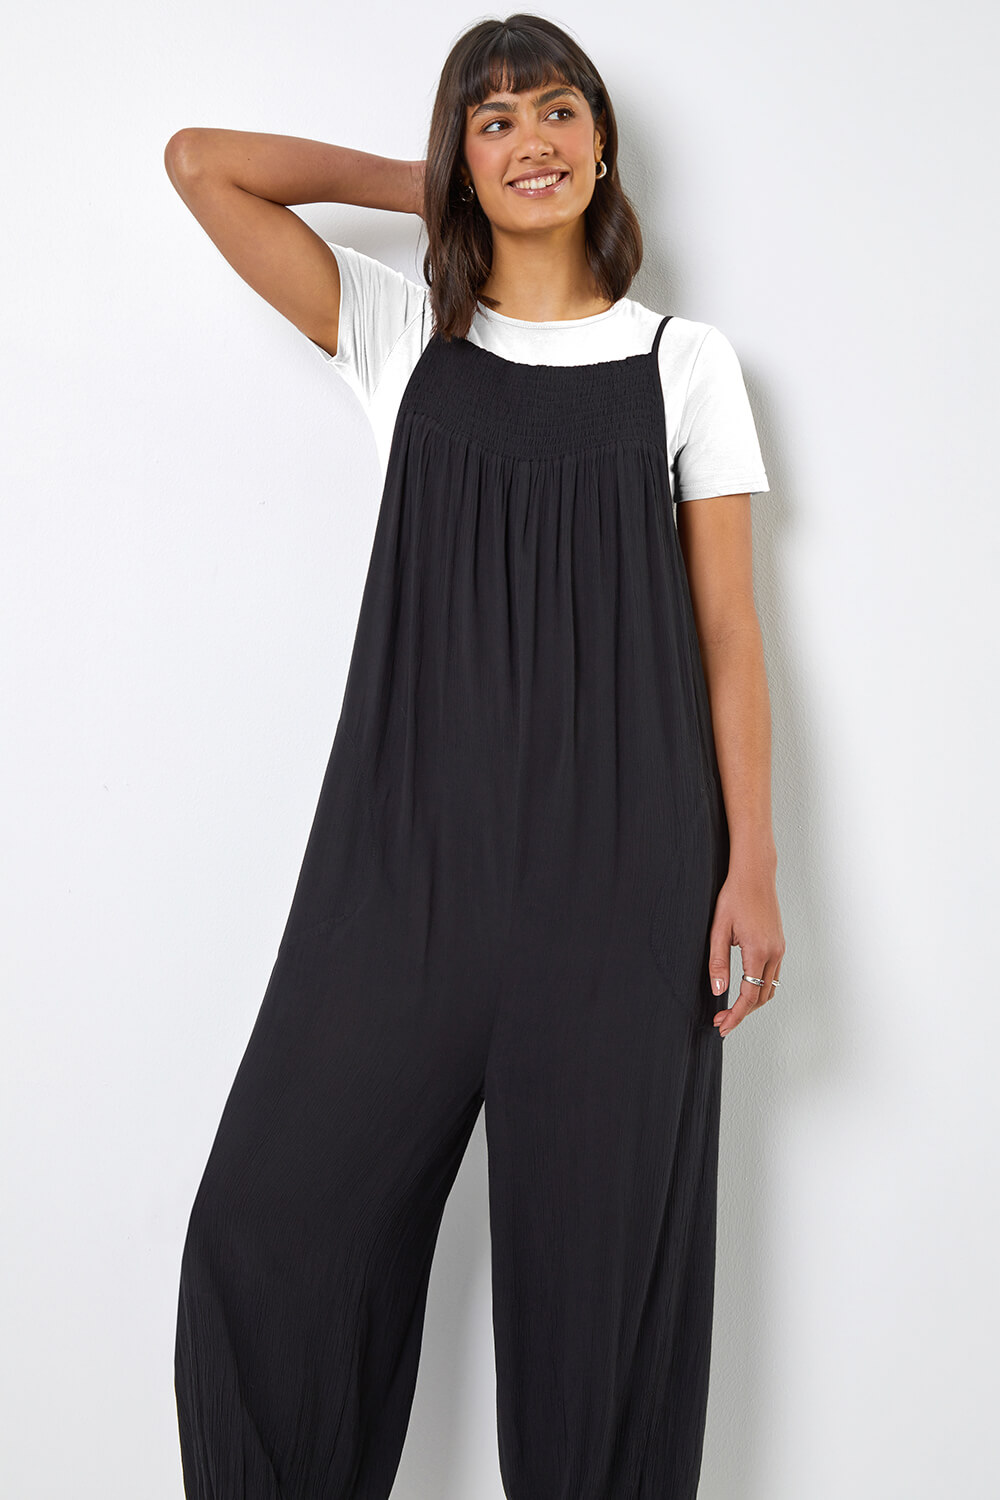 Black Strappy Full Length Shirred Jumpsuit, Image 4 of 5